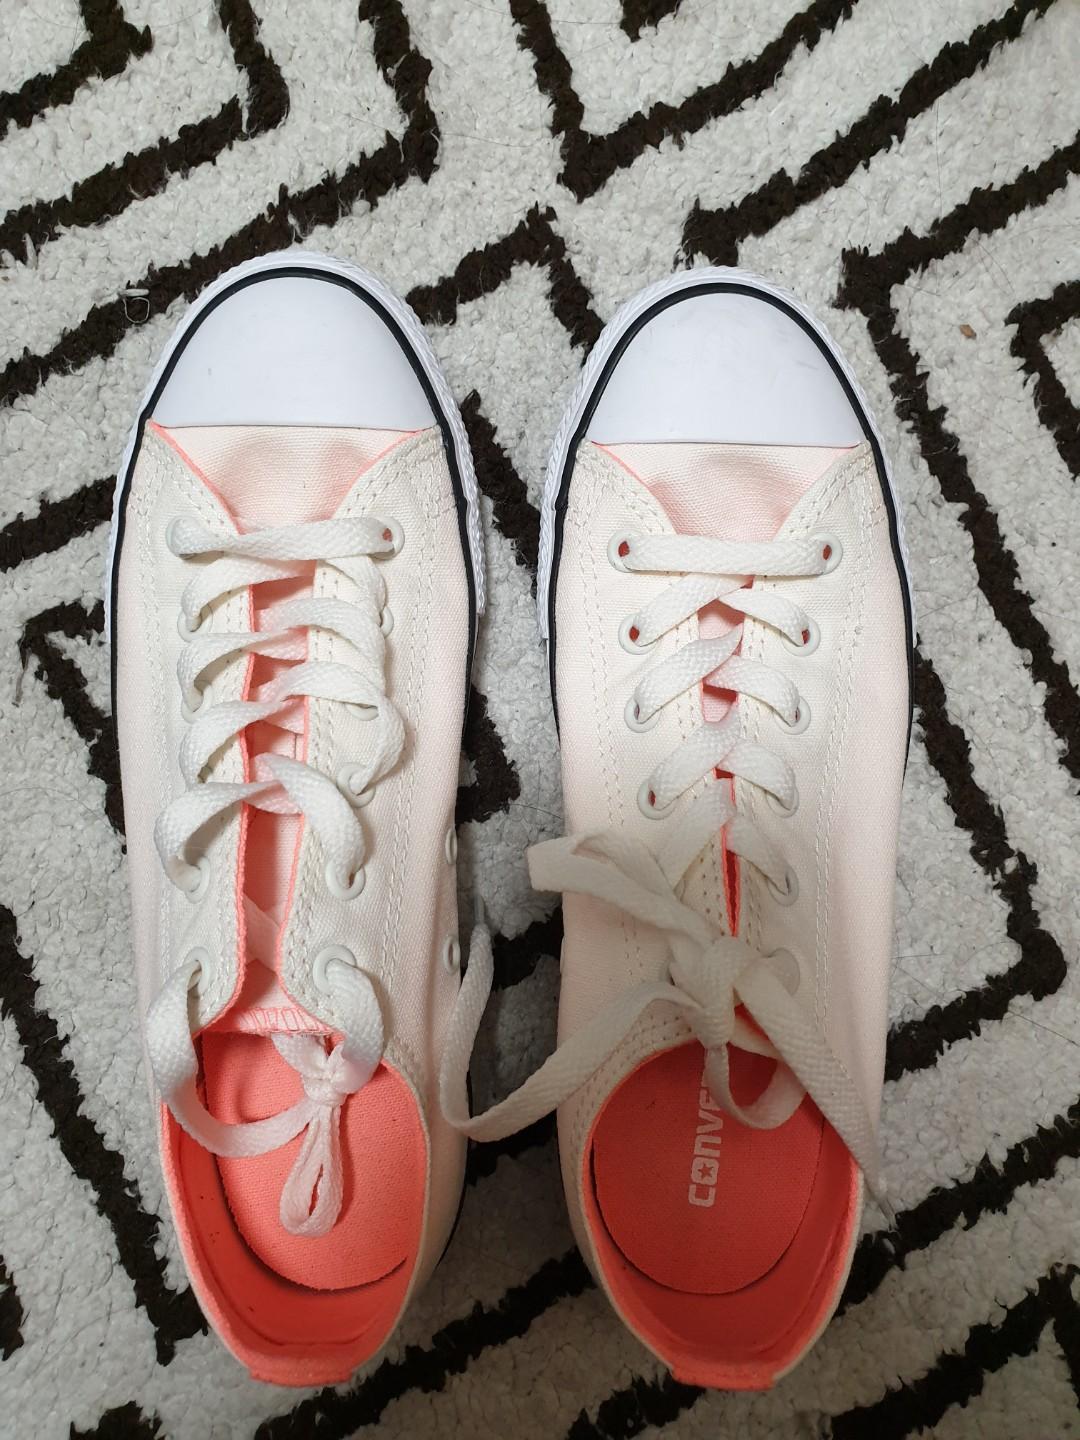 peach color sneakers